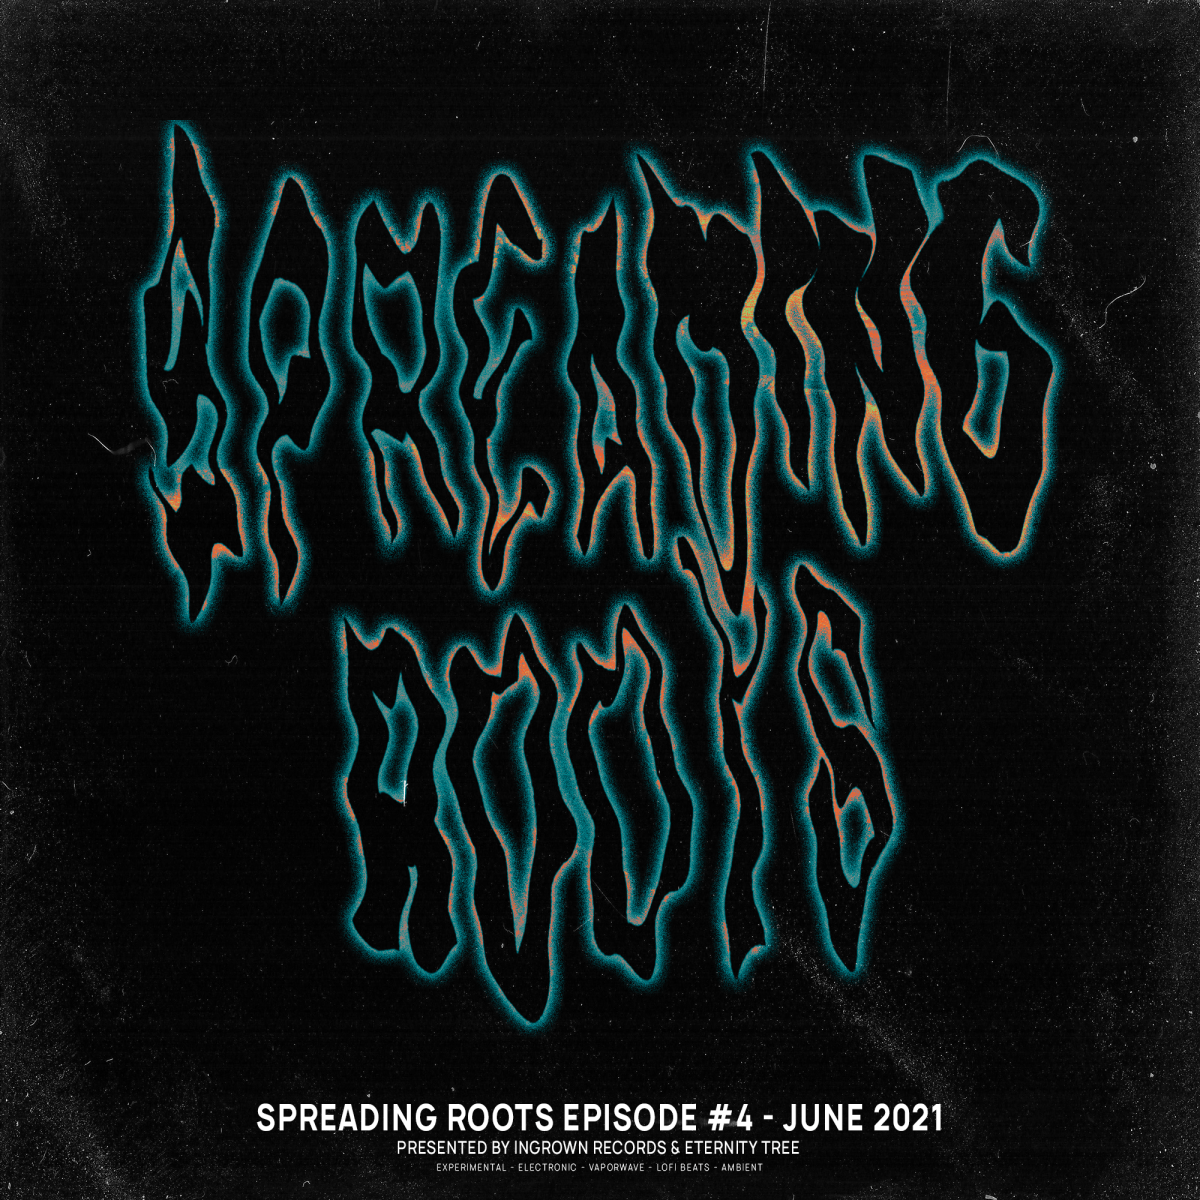 Spreading Roots Episode #4